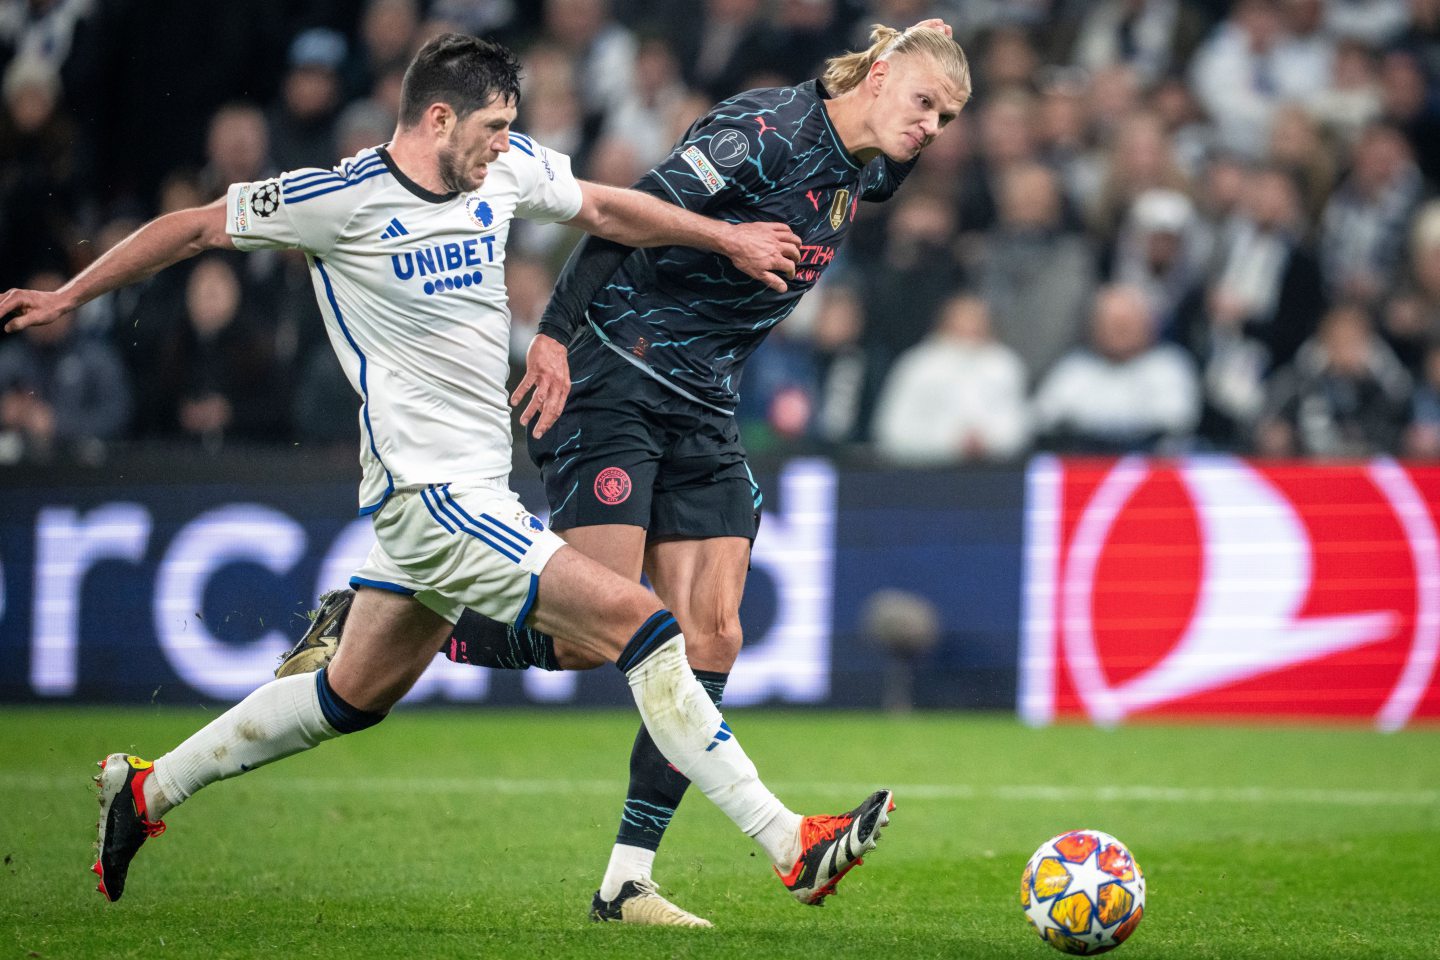 FC Copenhagen's Scott McKenna in action against Manchester City's Erling Haaland during the UEFA Champions League round of 16 first leg. Image: Shutterstock